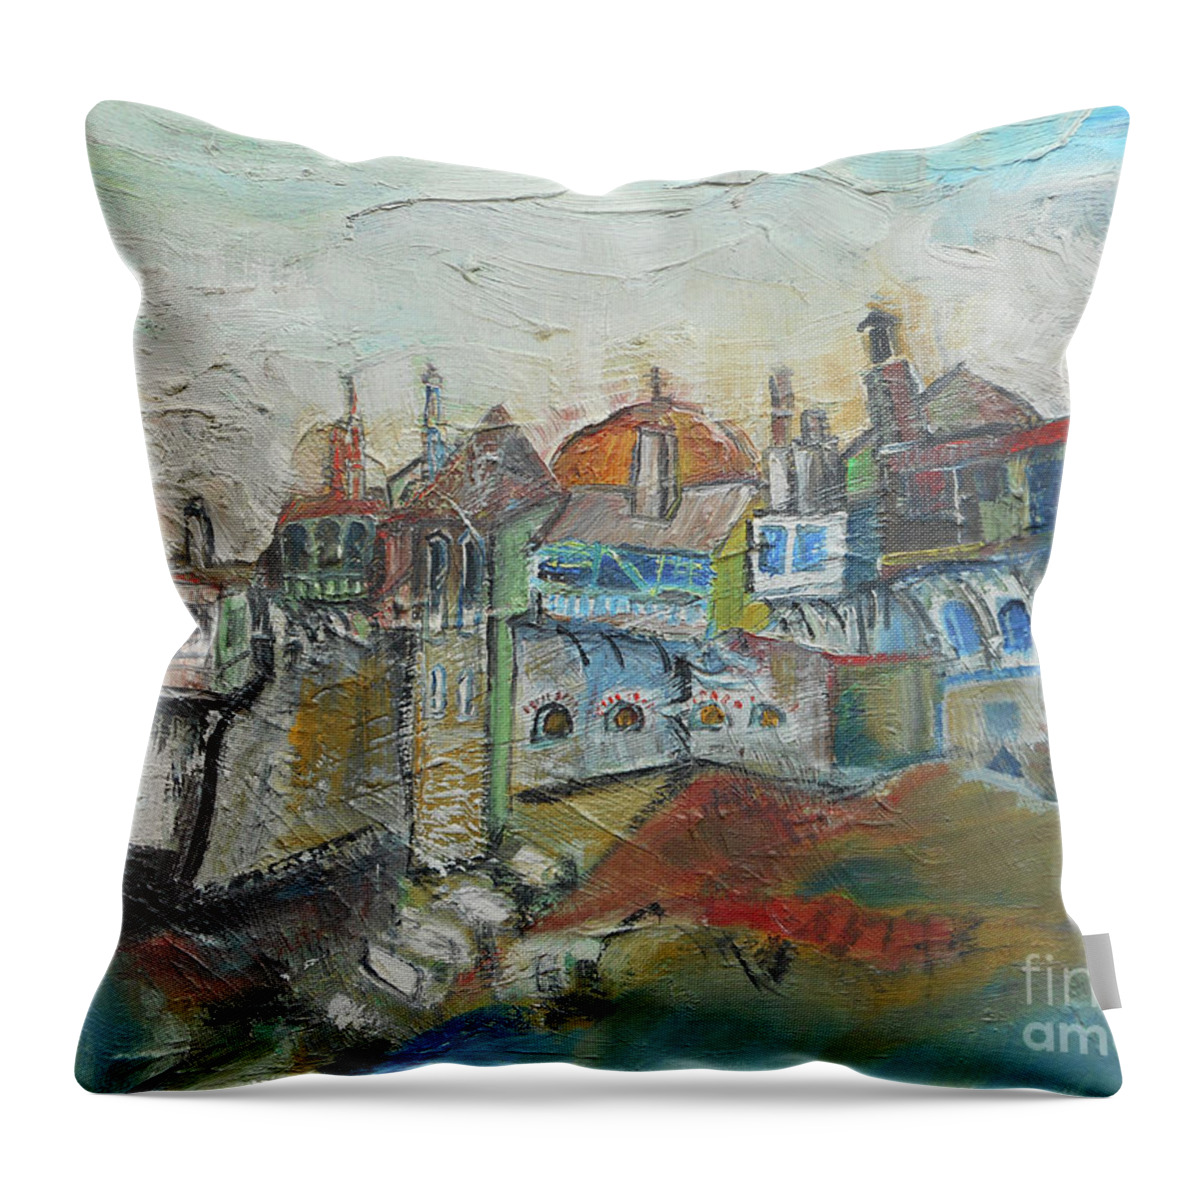 One Of My Very First Oil Paintings At Age 14: The Sea Has Always Been My Favorite Theme As I Have Always Lived Next To It Since My Childhood! Throw Pillow featuring the painting Sea Shore Village by Katerina Stamatelos